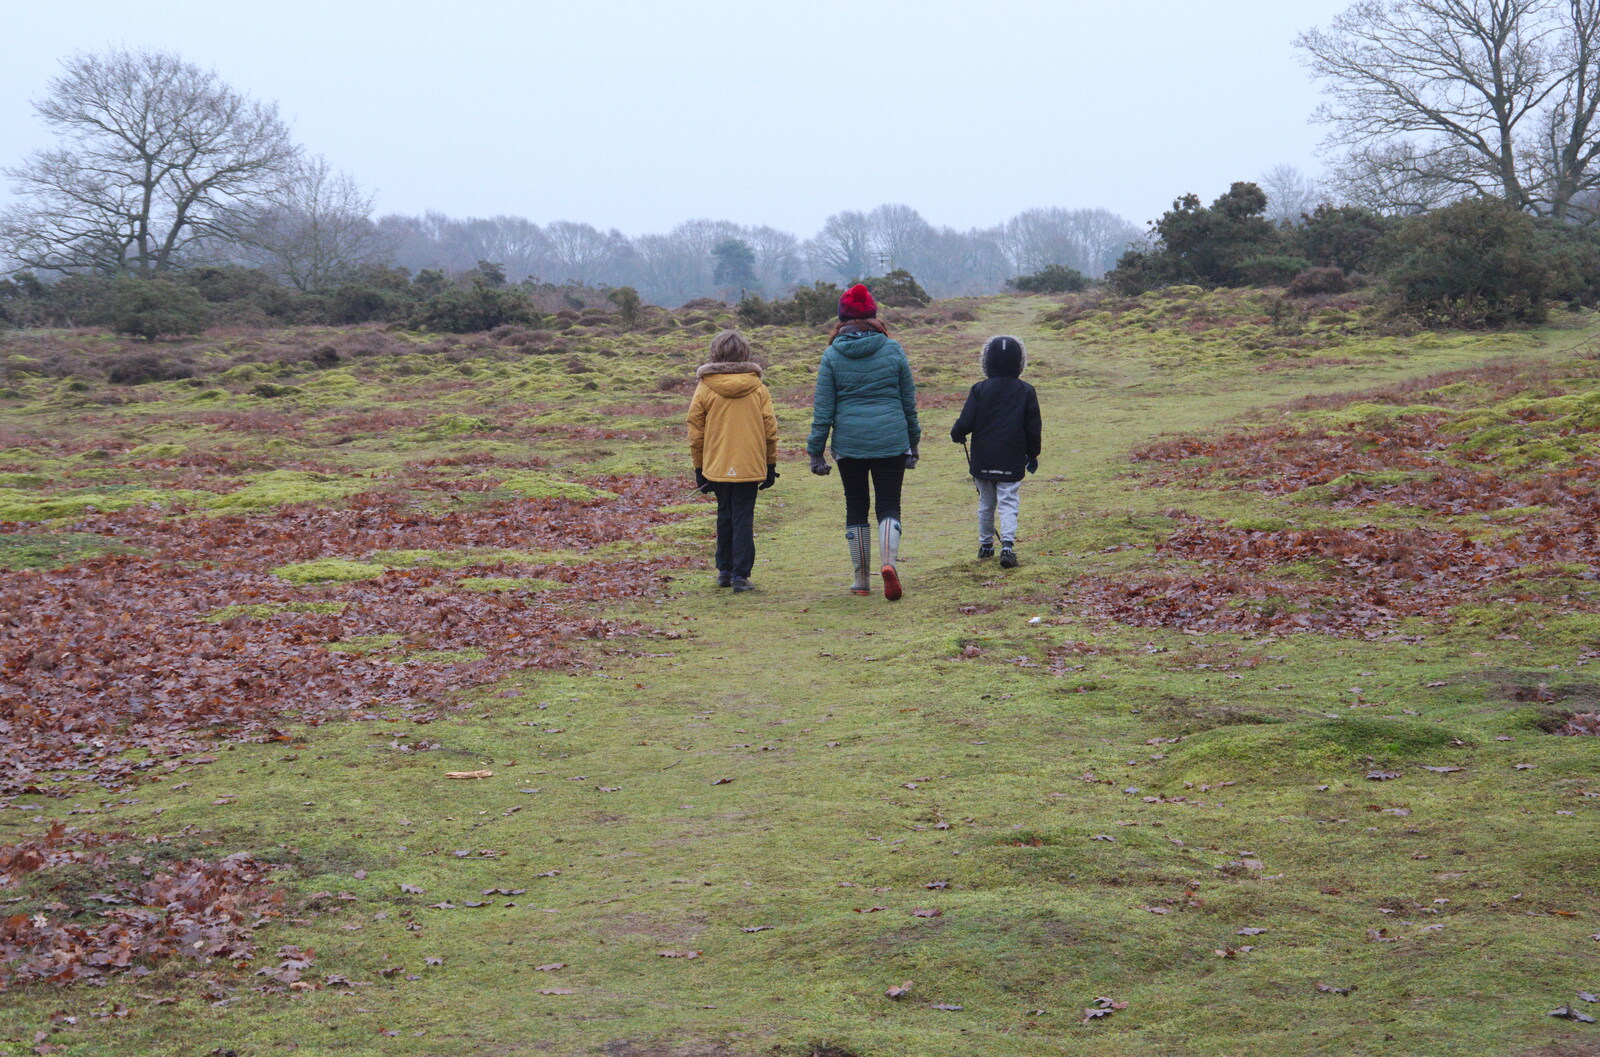 Wandering off over the Ling from New Year's Day on the Ling, Wortham, Suffolk - 1st January 2020